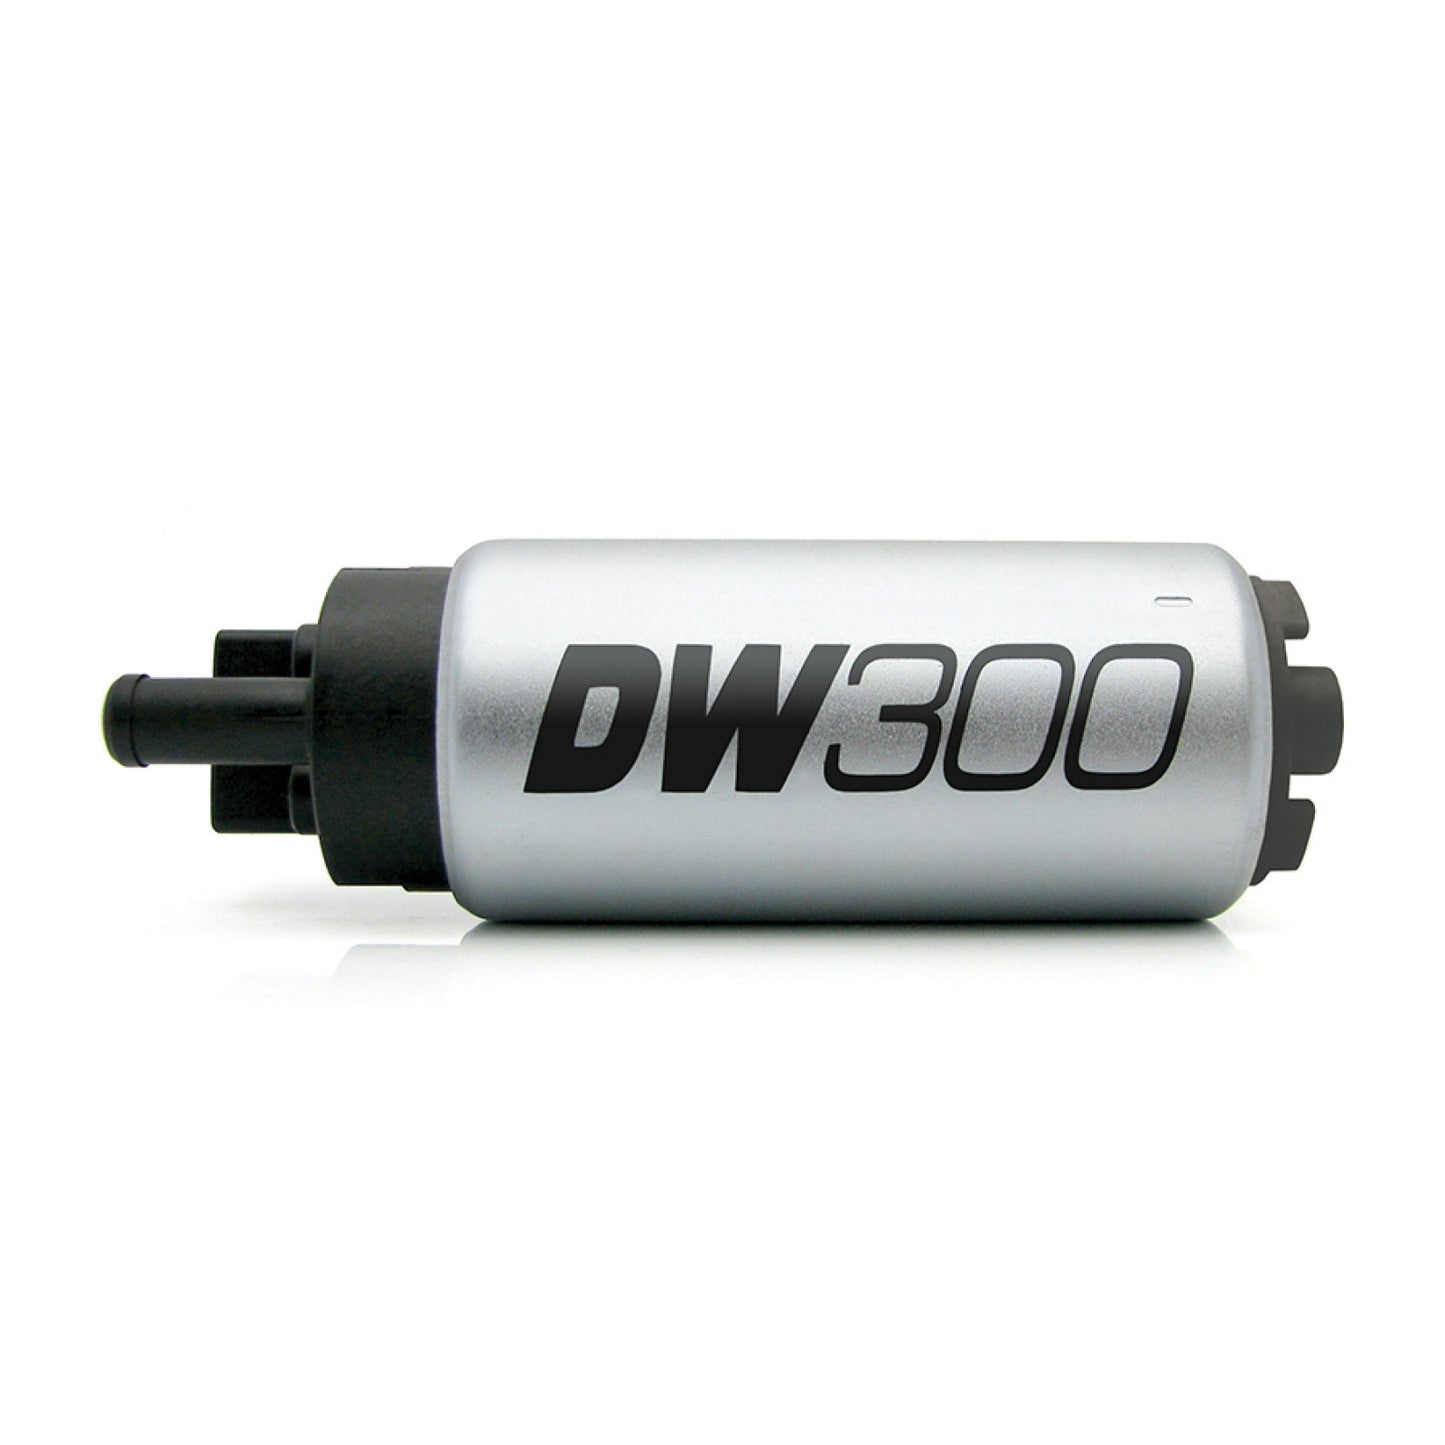 Deatschwerks DW300C 340lph Fuel Pump for 06-15 Mazda MX, 02-06 Acura RSX, and 01-04 Honda Civic